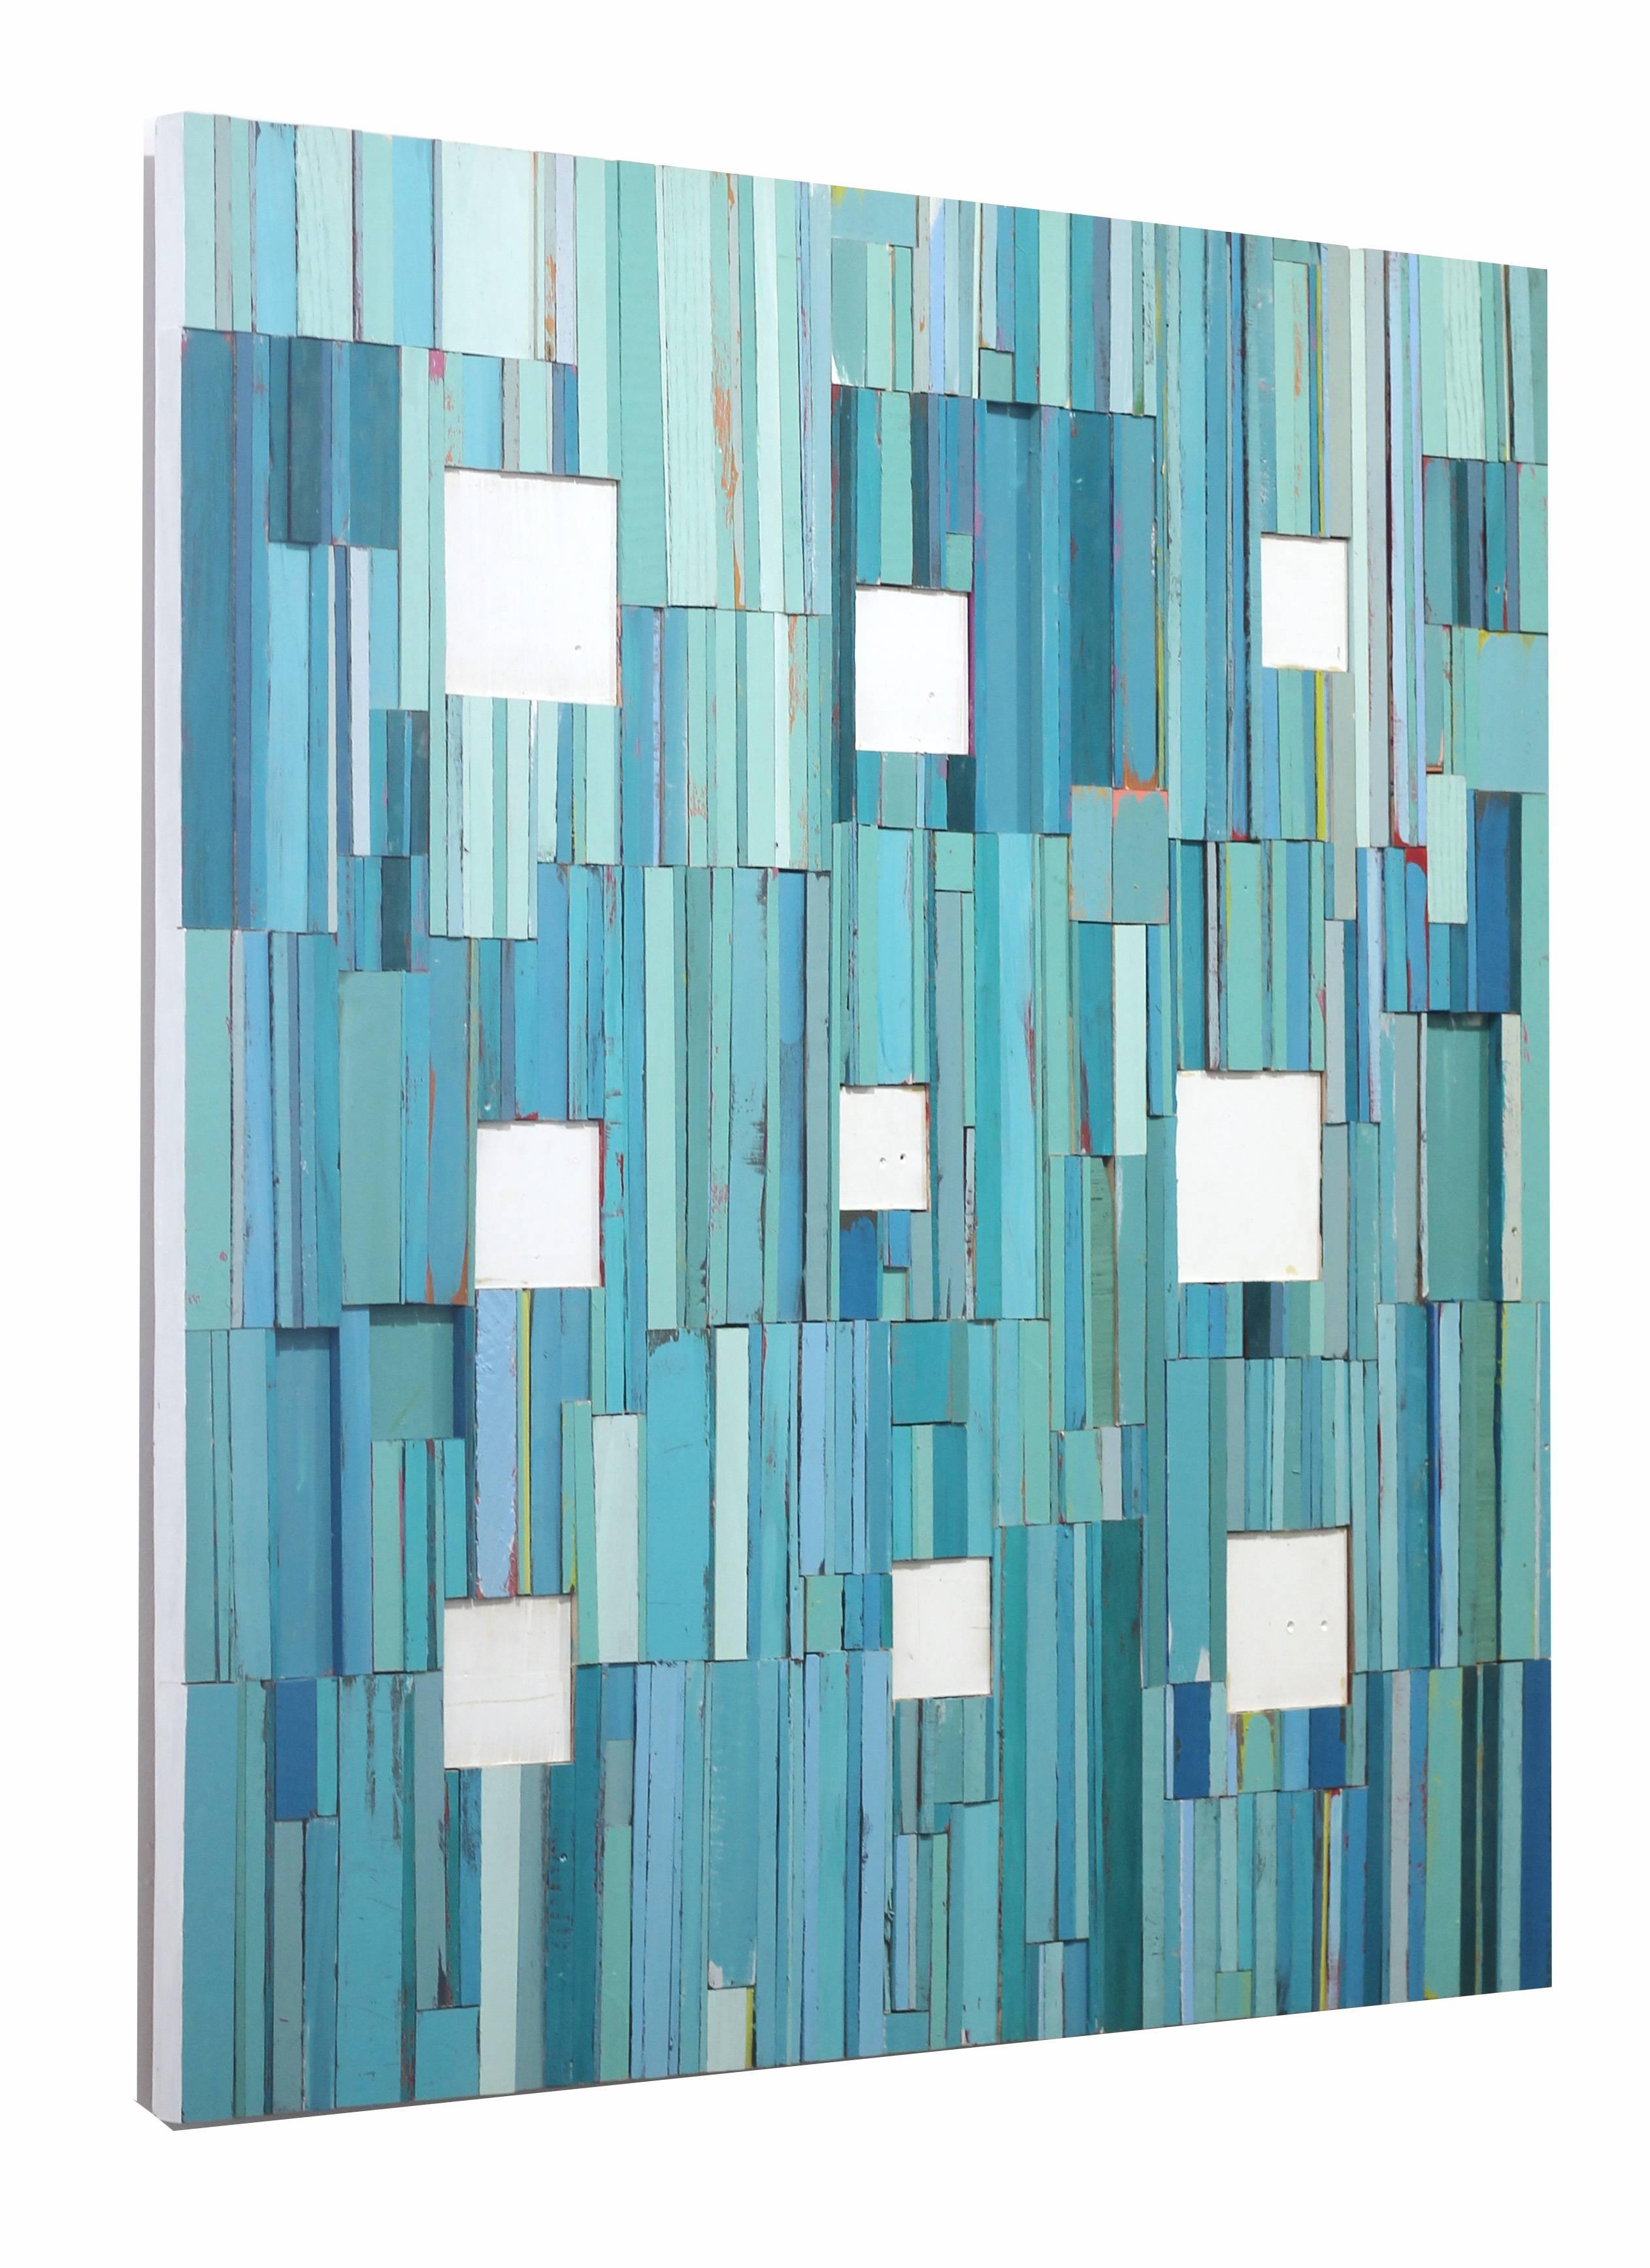 This 48 inch square original mixed media artwork by Rebecca Klundt is a assemblage of found wood, finished with layers of acrylic paint, resulting in a geometric abstraction artwork. It is mounted on a wood panel, wired and ready to hang. The sides